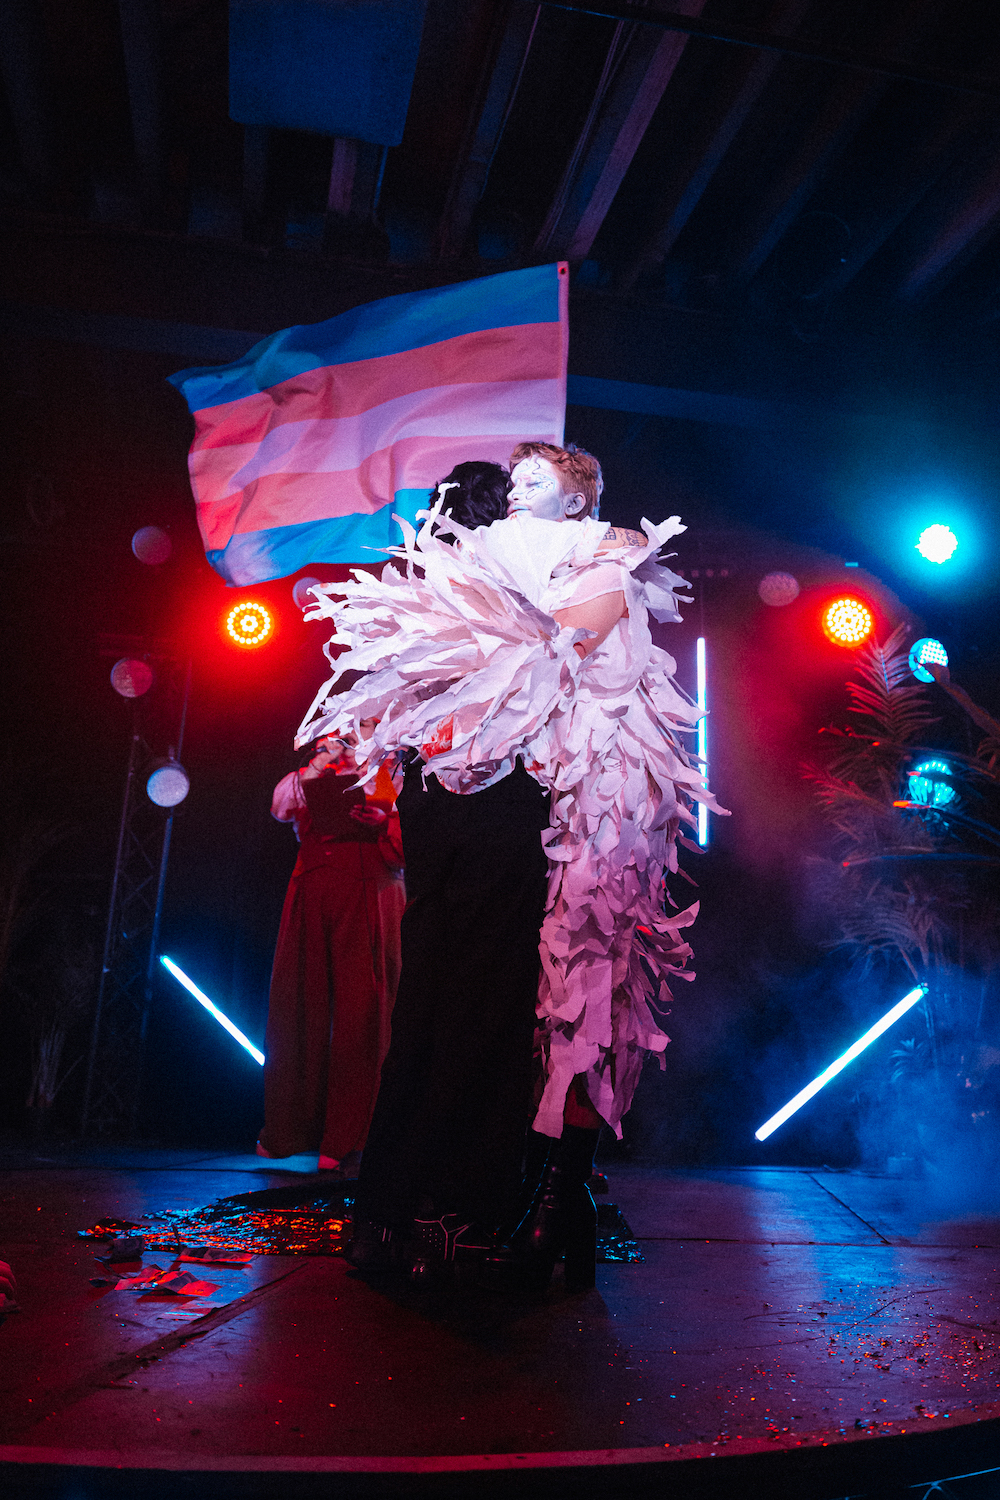 The signature trans flag, with its white, pink and blue colours, sways underneath the lights as two drag performers hug on stage.